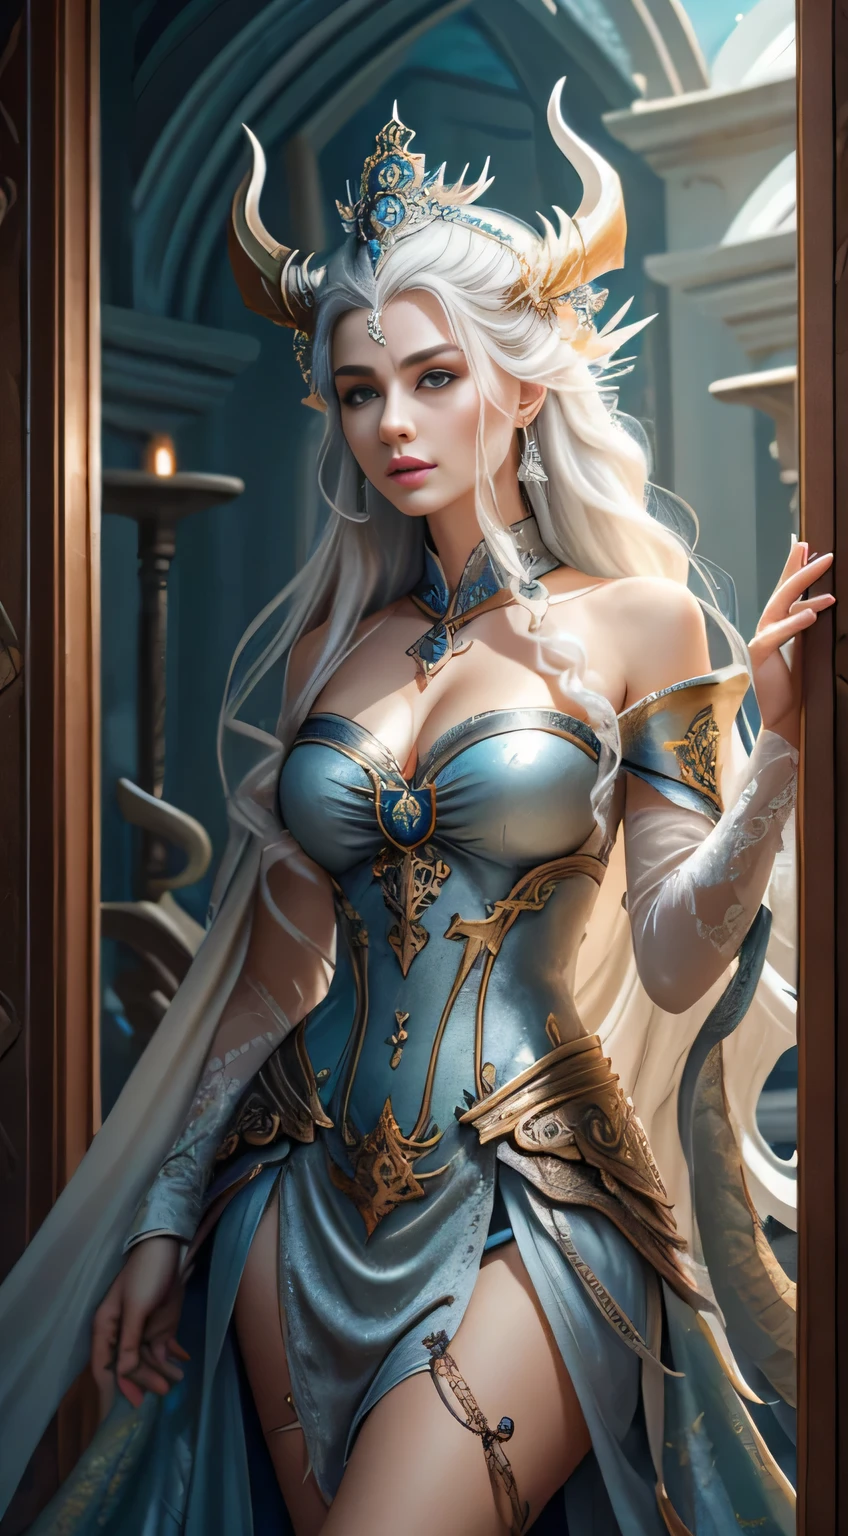 unreal engine:1.4,UHD,The best quality:1.4, photorealistic:1.4, skin texture:1.4, masterpiece:1.8,White Dragon Queen, young and mature woman, Long elf ears, ELEGANT DRESS, big chest, curve, Dragon Ling Vawy Hair, super long hair, Smooth Face Features, White dragon horns on his head, majestic woman, silver decoration om your dress, Silver Star Queen,big blue eyes, Cherry Lips, white dragons:1.4, starry sky,detailed hands:1.4,